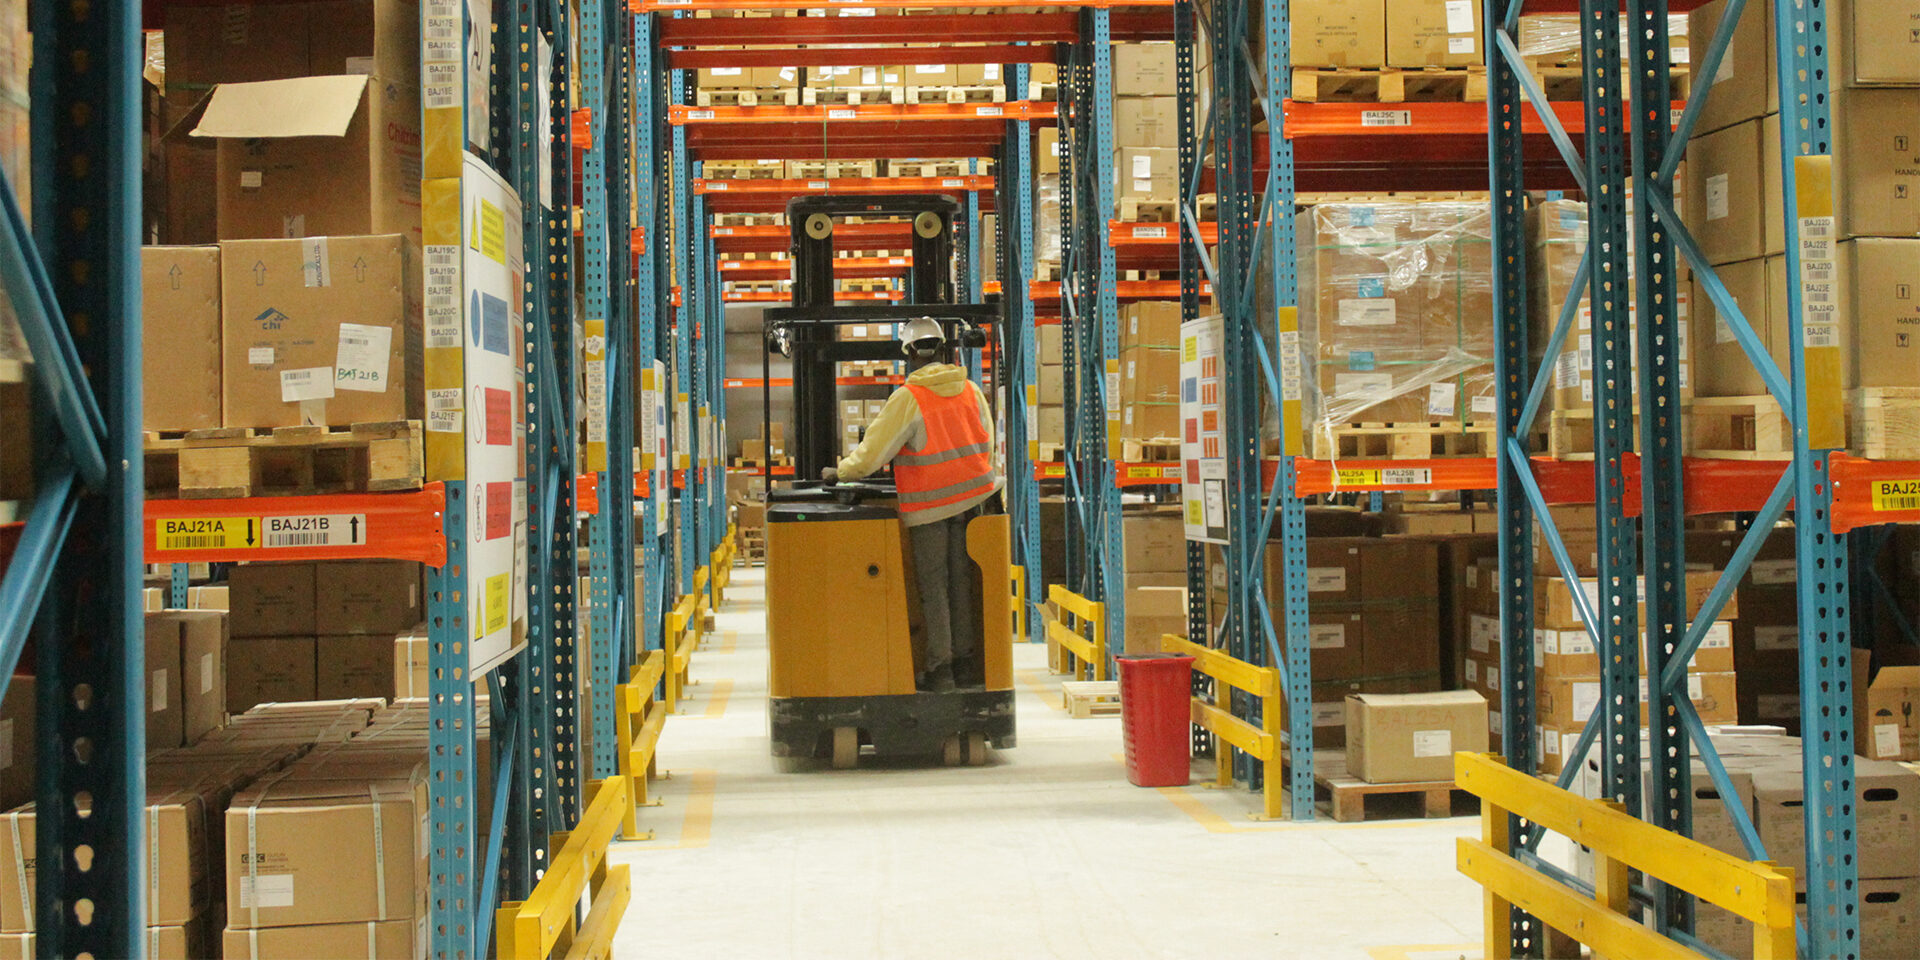 A man driving a forklift down a warehouse aisle with shelves of boxes on each side.